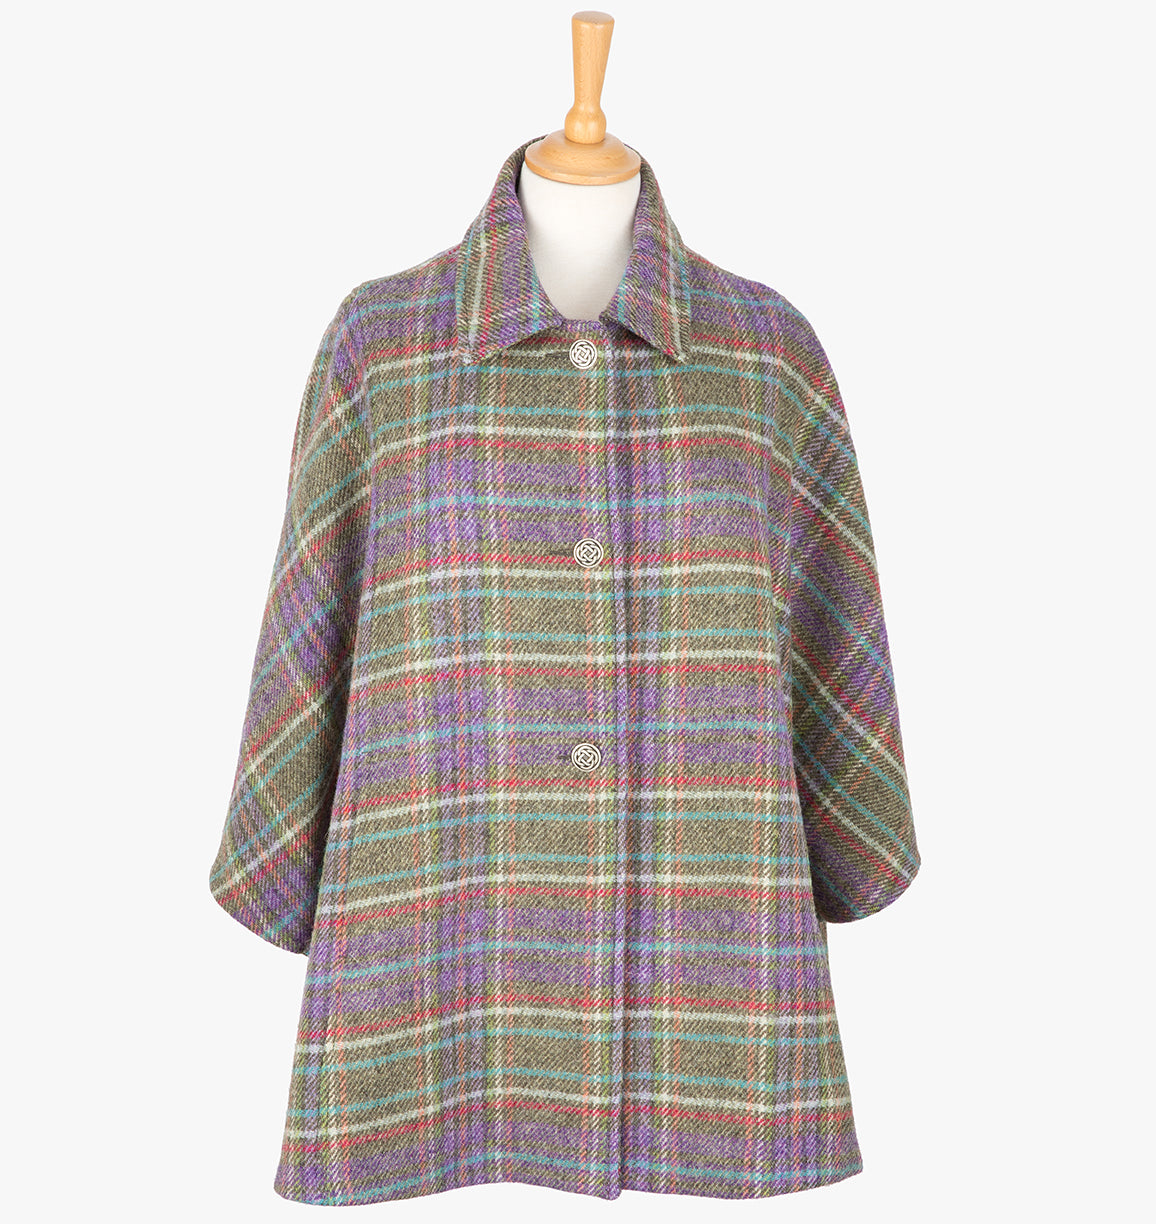 This is the Harris Tweed cape in Multi check, the colour is purple and  green with a white, red and turquoise overcheck. It has 3 buttons and a collar that can be worn both up and down. It has buttons at the side which hold the cape together to give it more structure. This cape has two pockets and is a one size fits all garment.